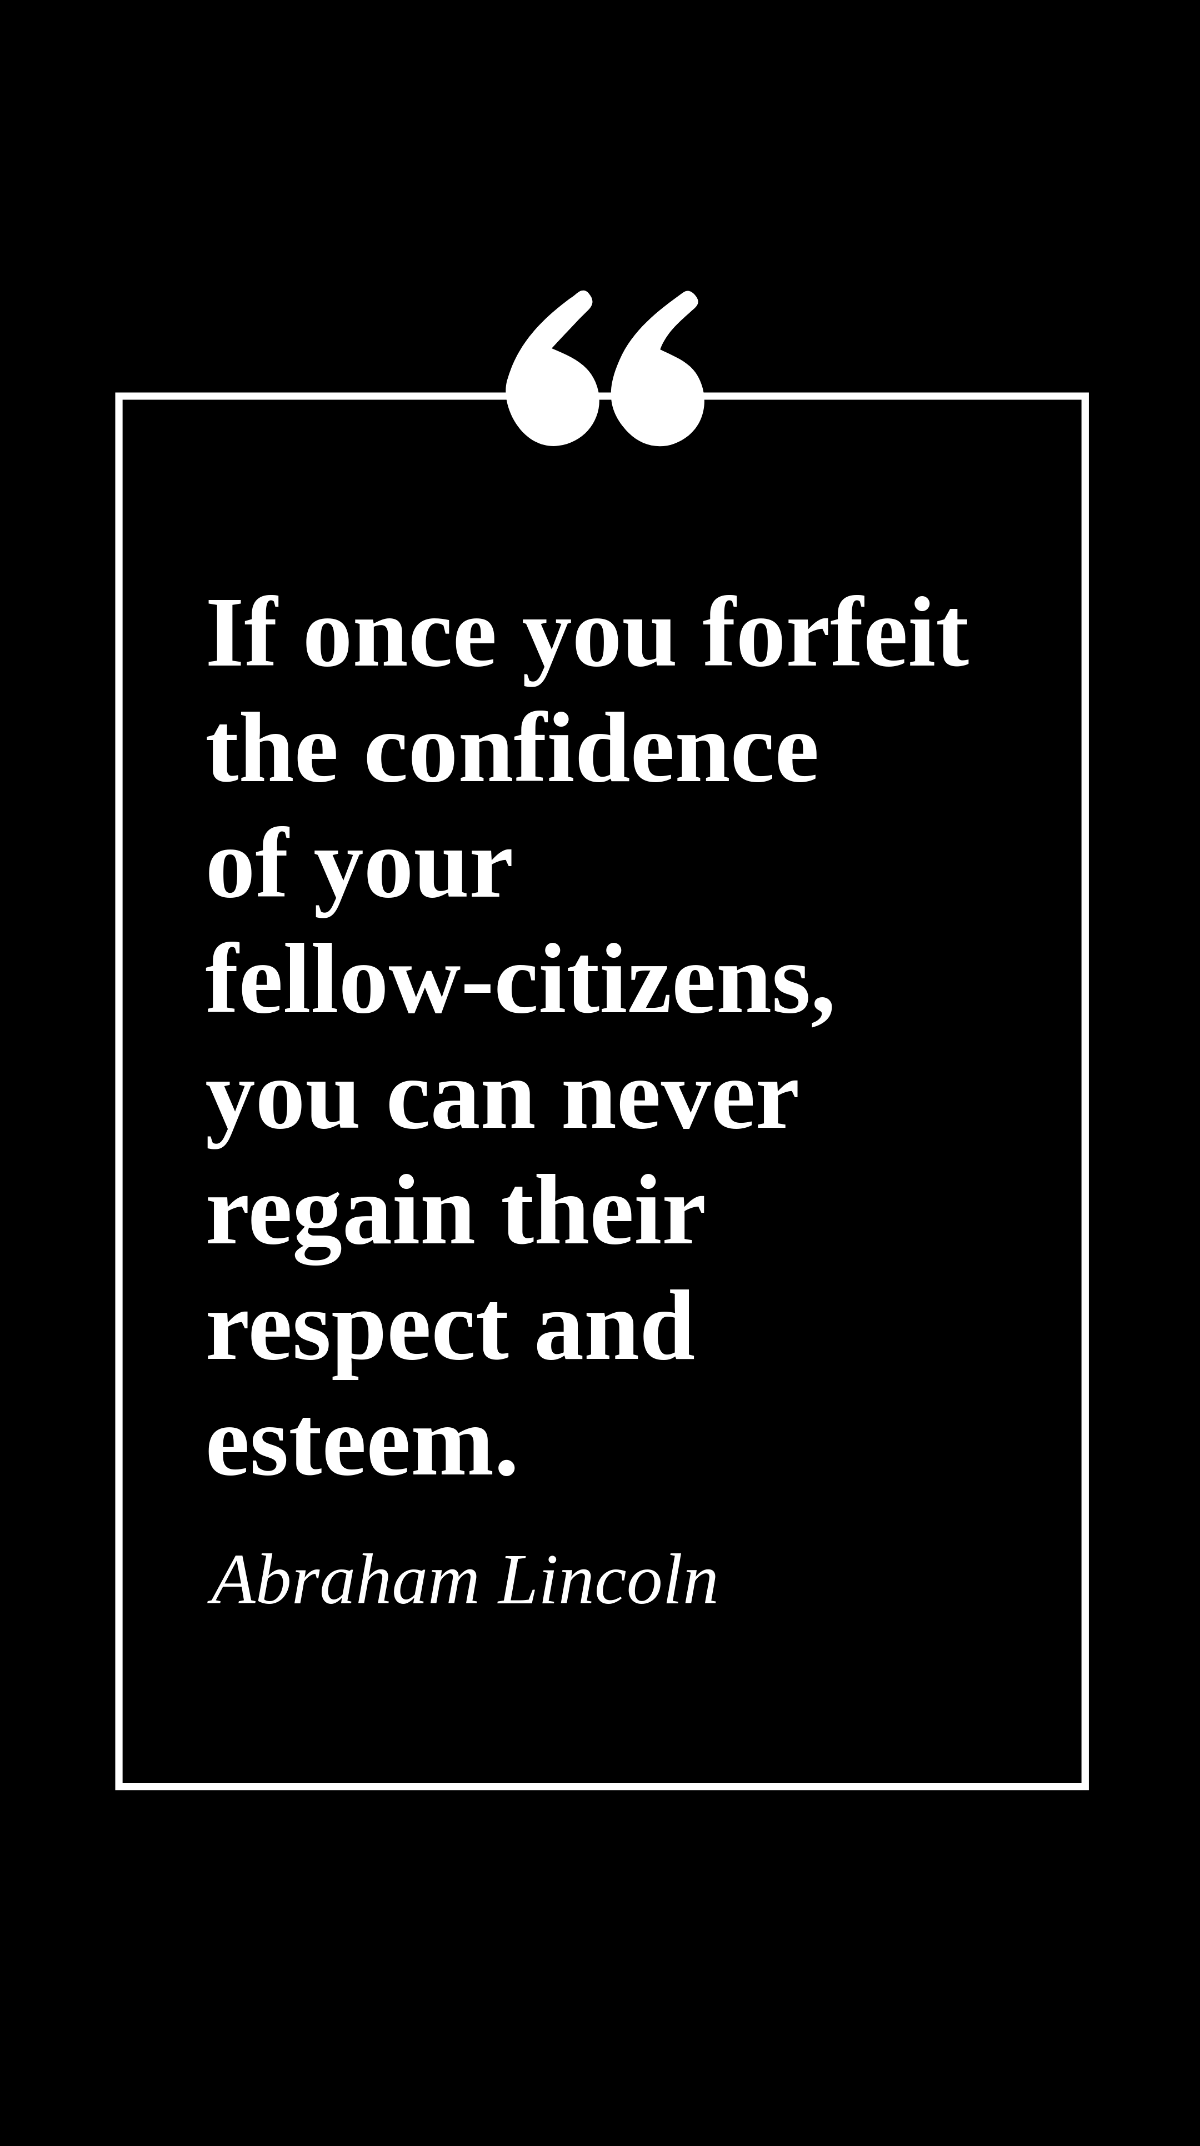 Abraham Lincoln - If once you forfeit the confidence of your fellow-citizens, you can never regain their respect and esteem. Template